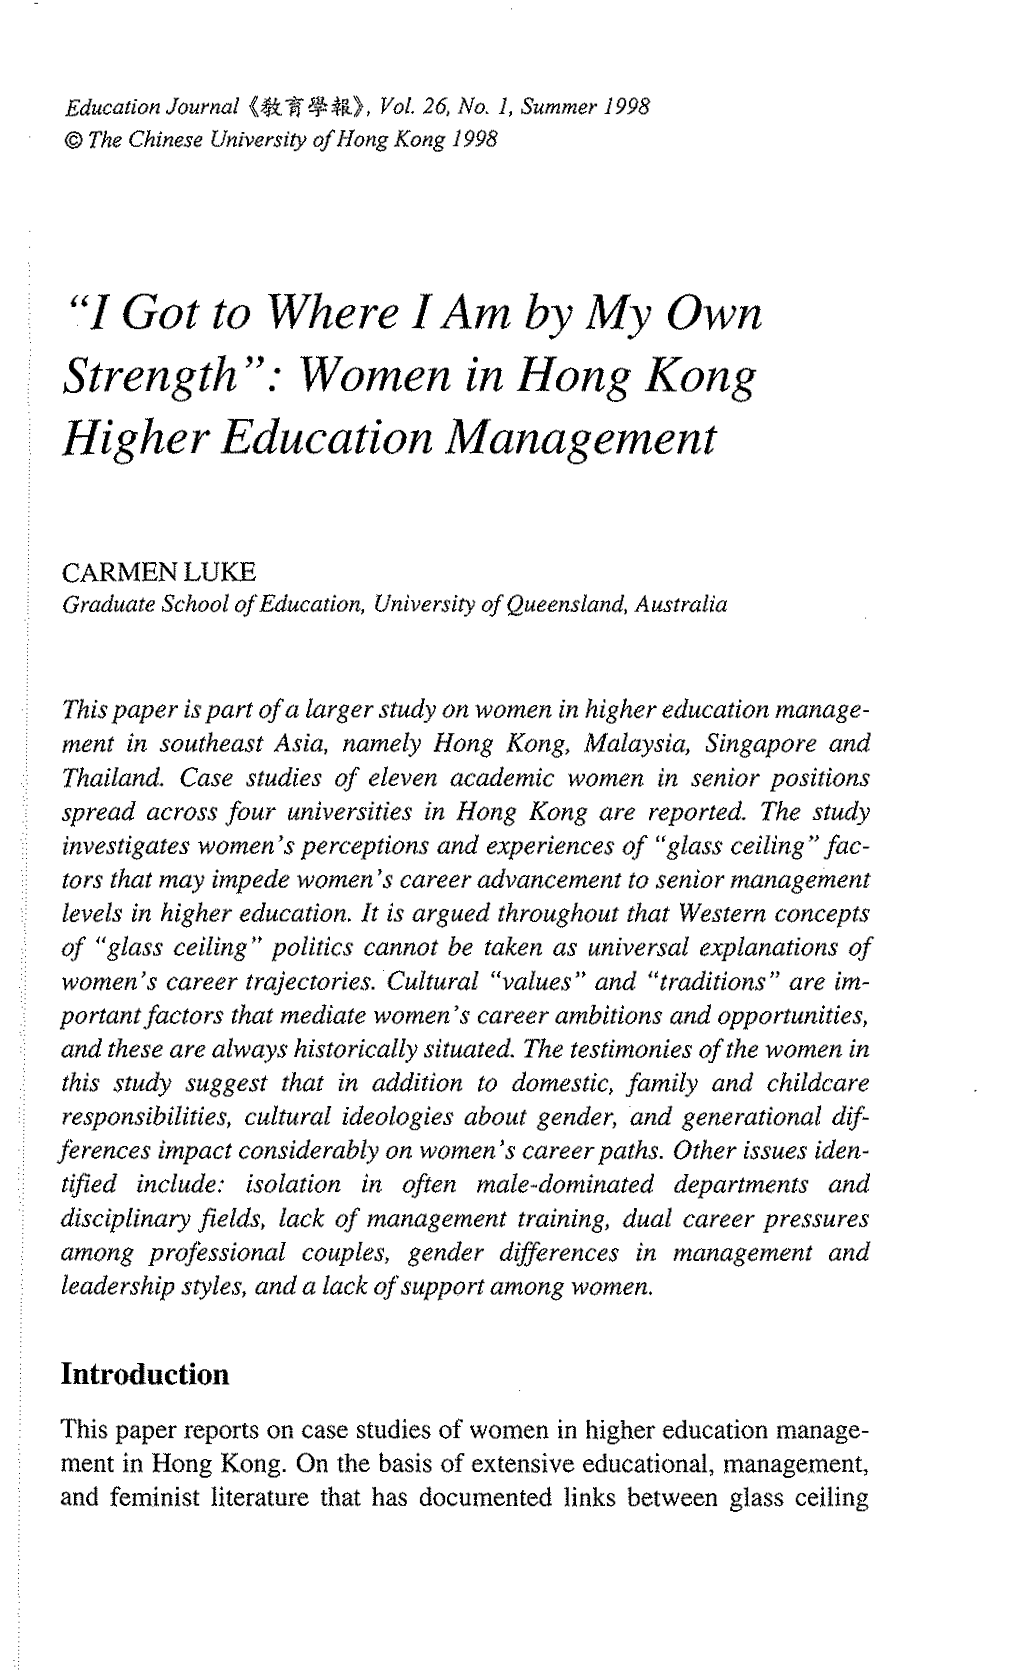 I Got to Where I Am by My Own Strength": Women in Hong Kong Higher Education Management